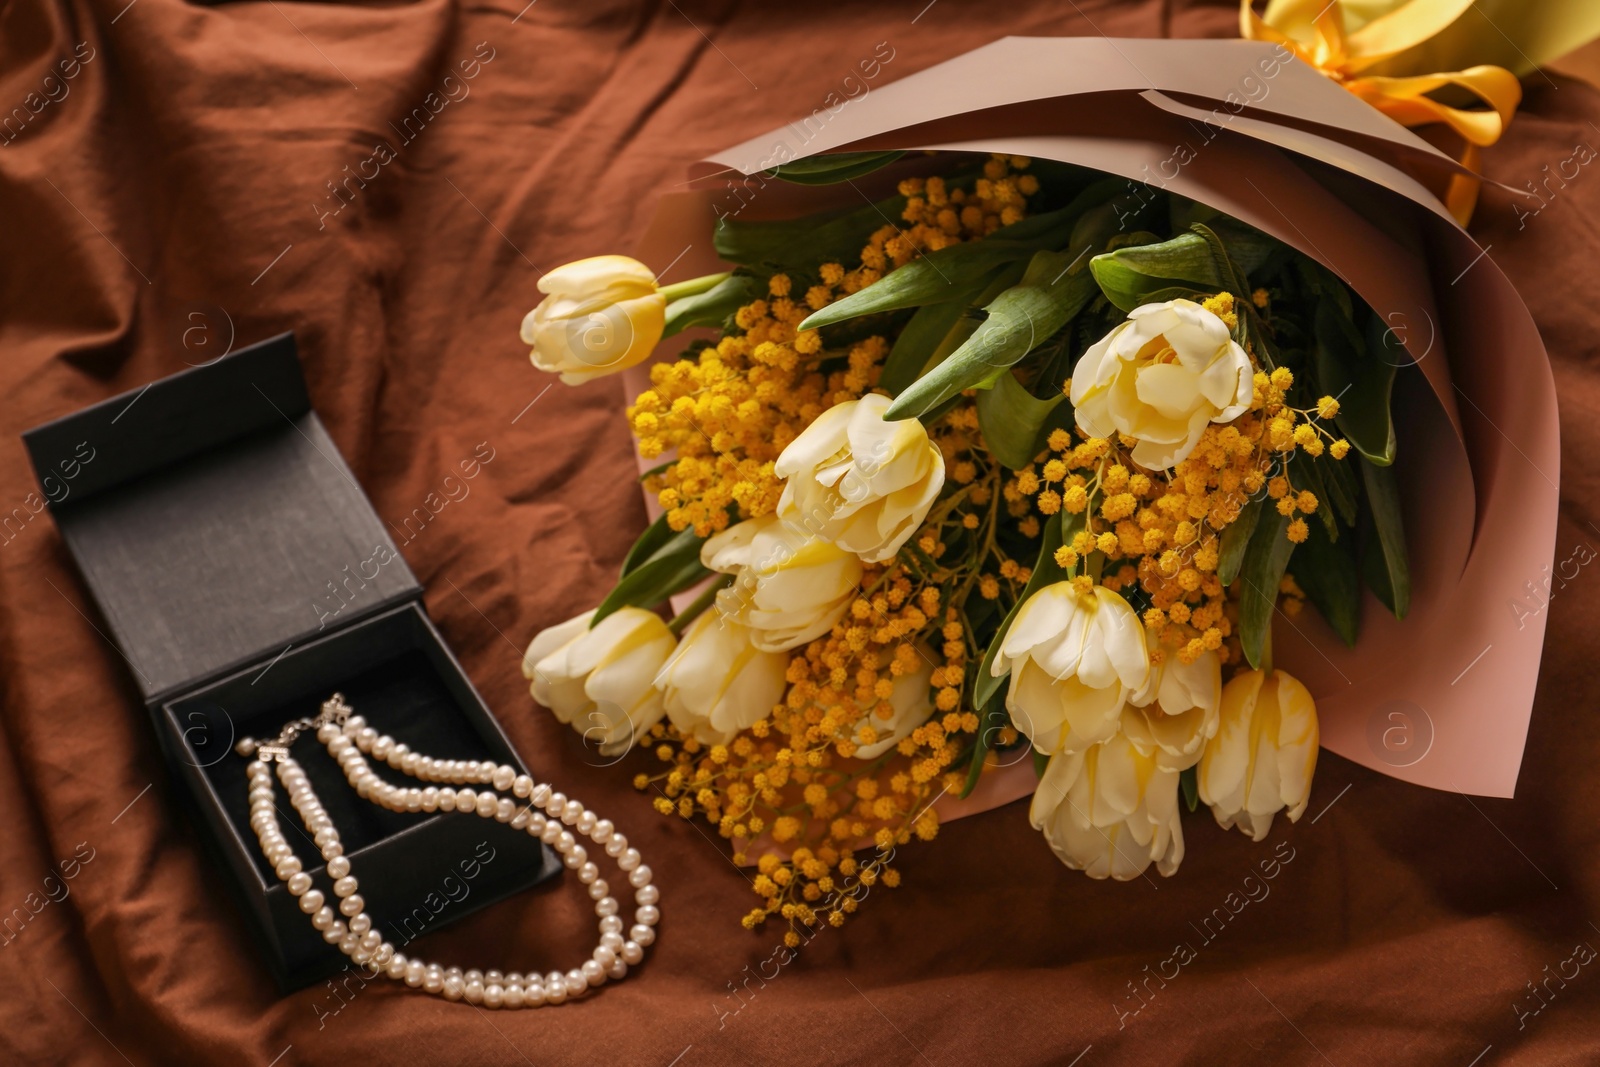 Photo of Bouquet of beautiful spring flowers and necklace on brown fabric, above view